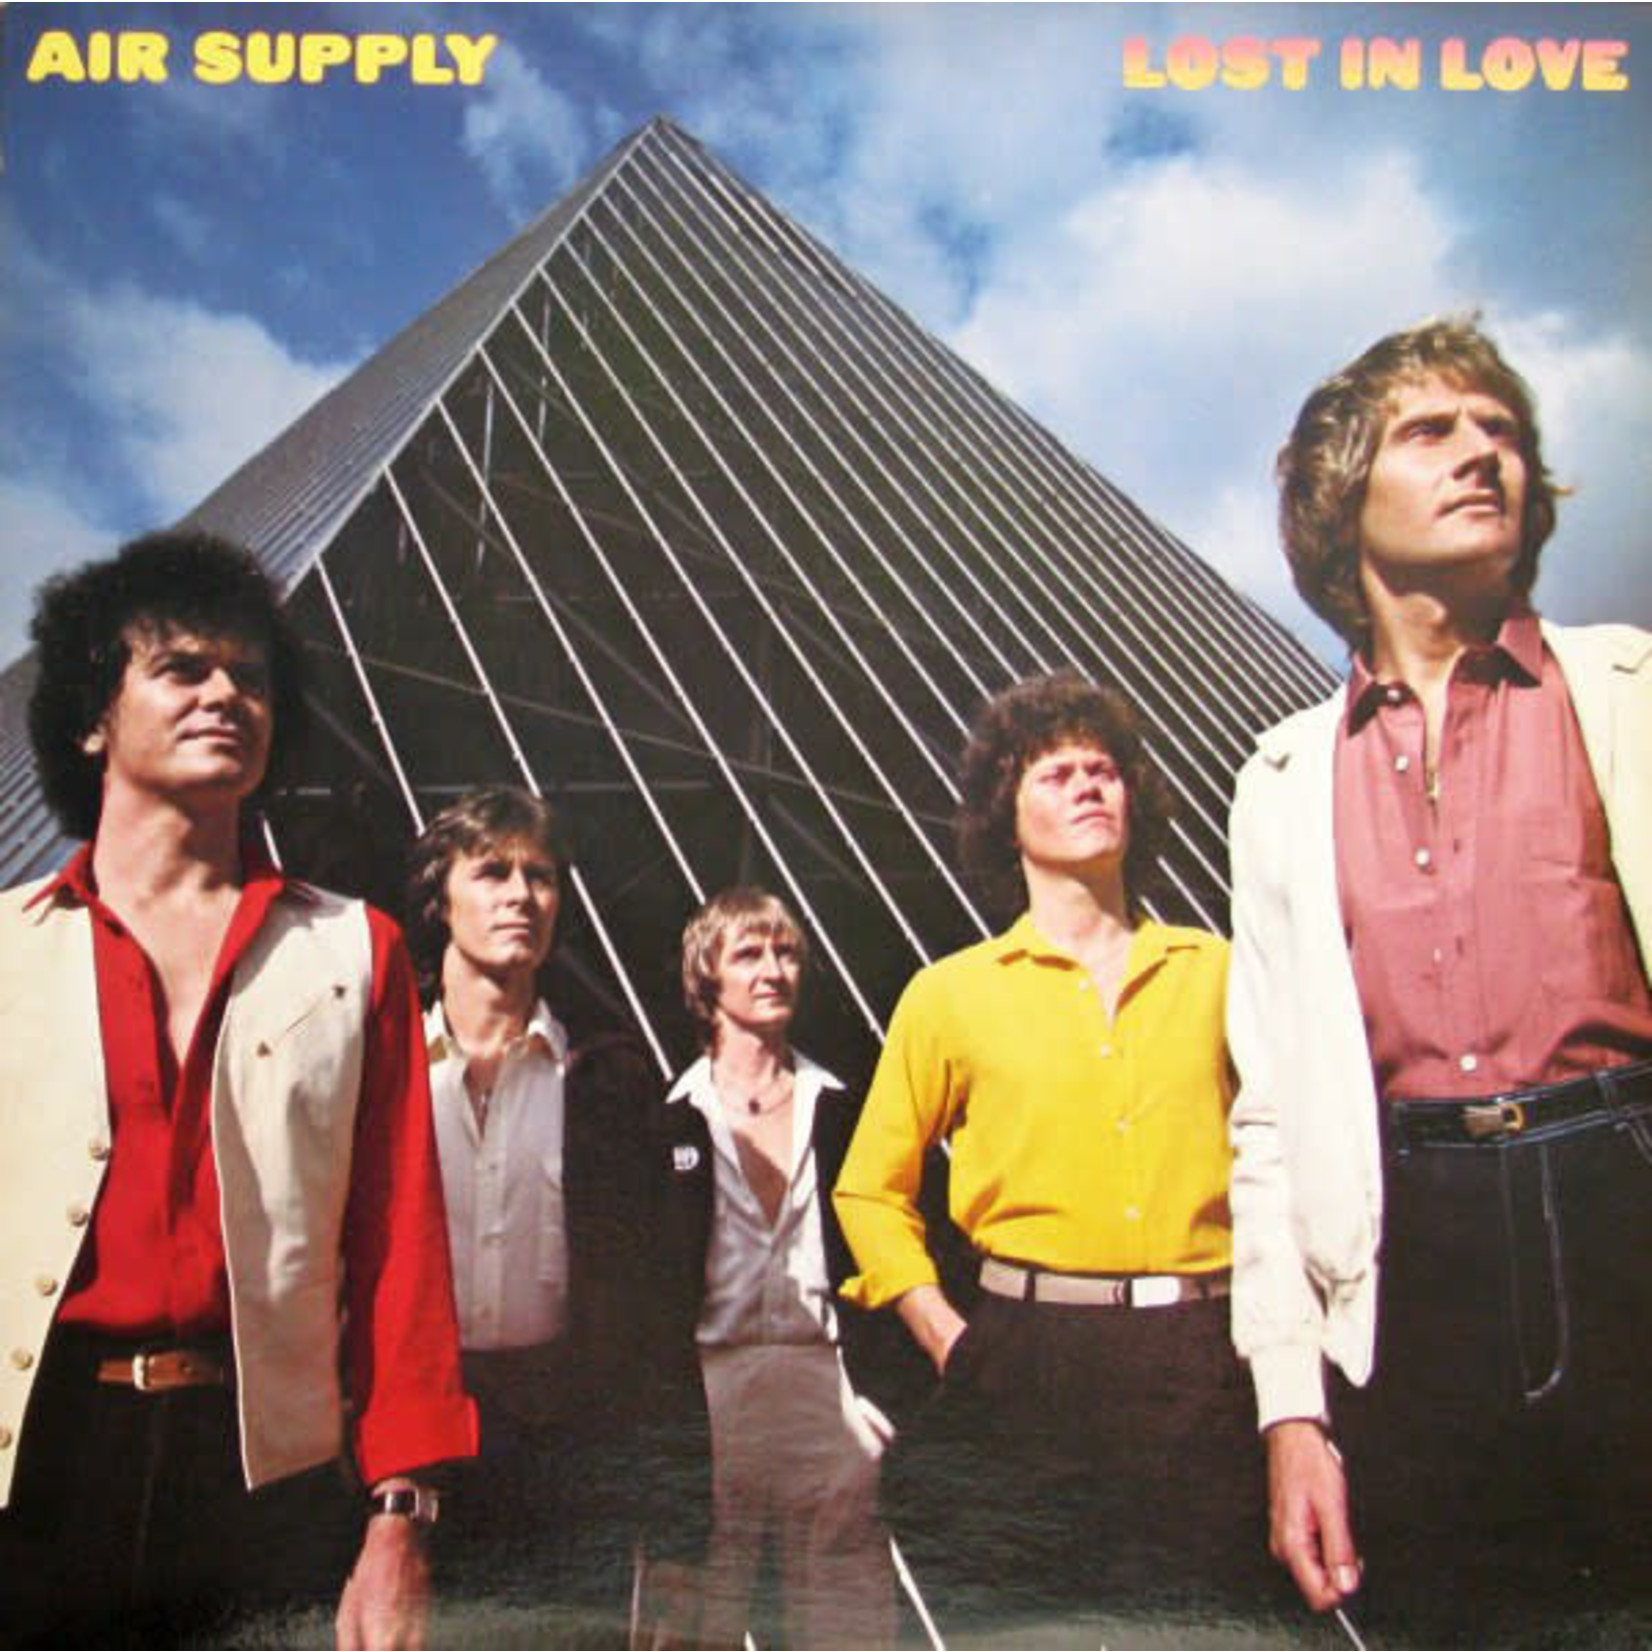 Air Supply Air Supply - Lost In Love (VG, 1980, LP, Wizard Records – WZDLP 001, Canada)